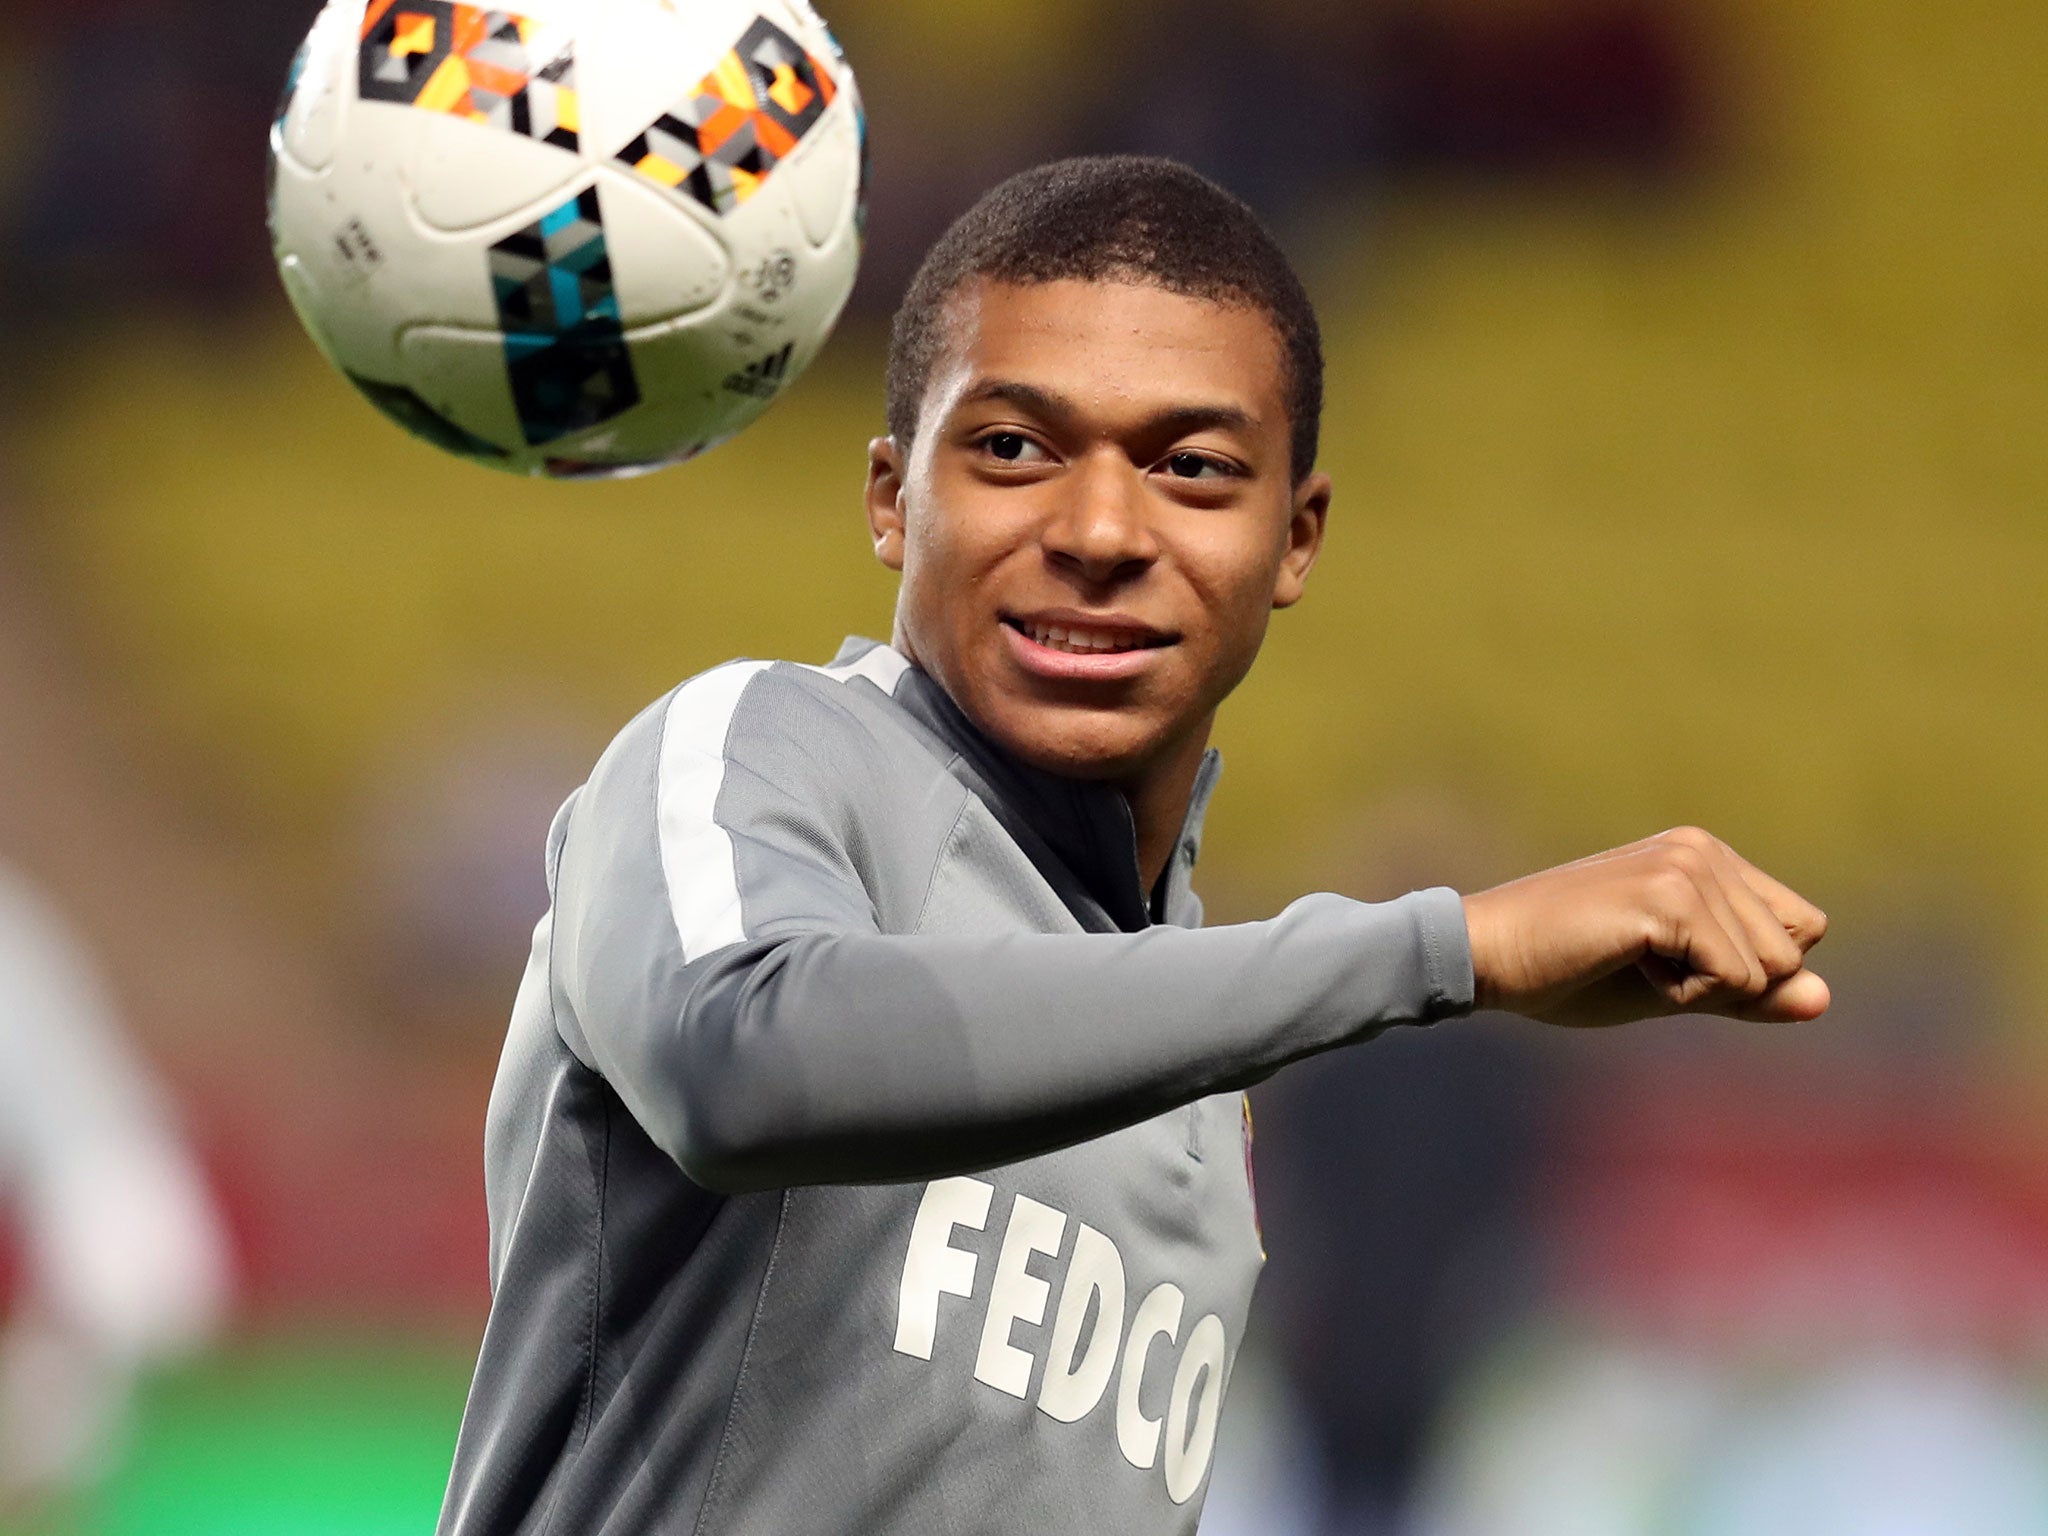 Mbappe netted 22 goals from 38 league appearances this season